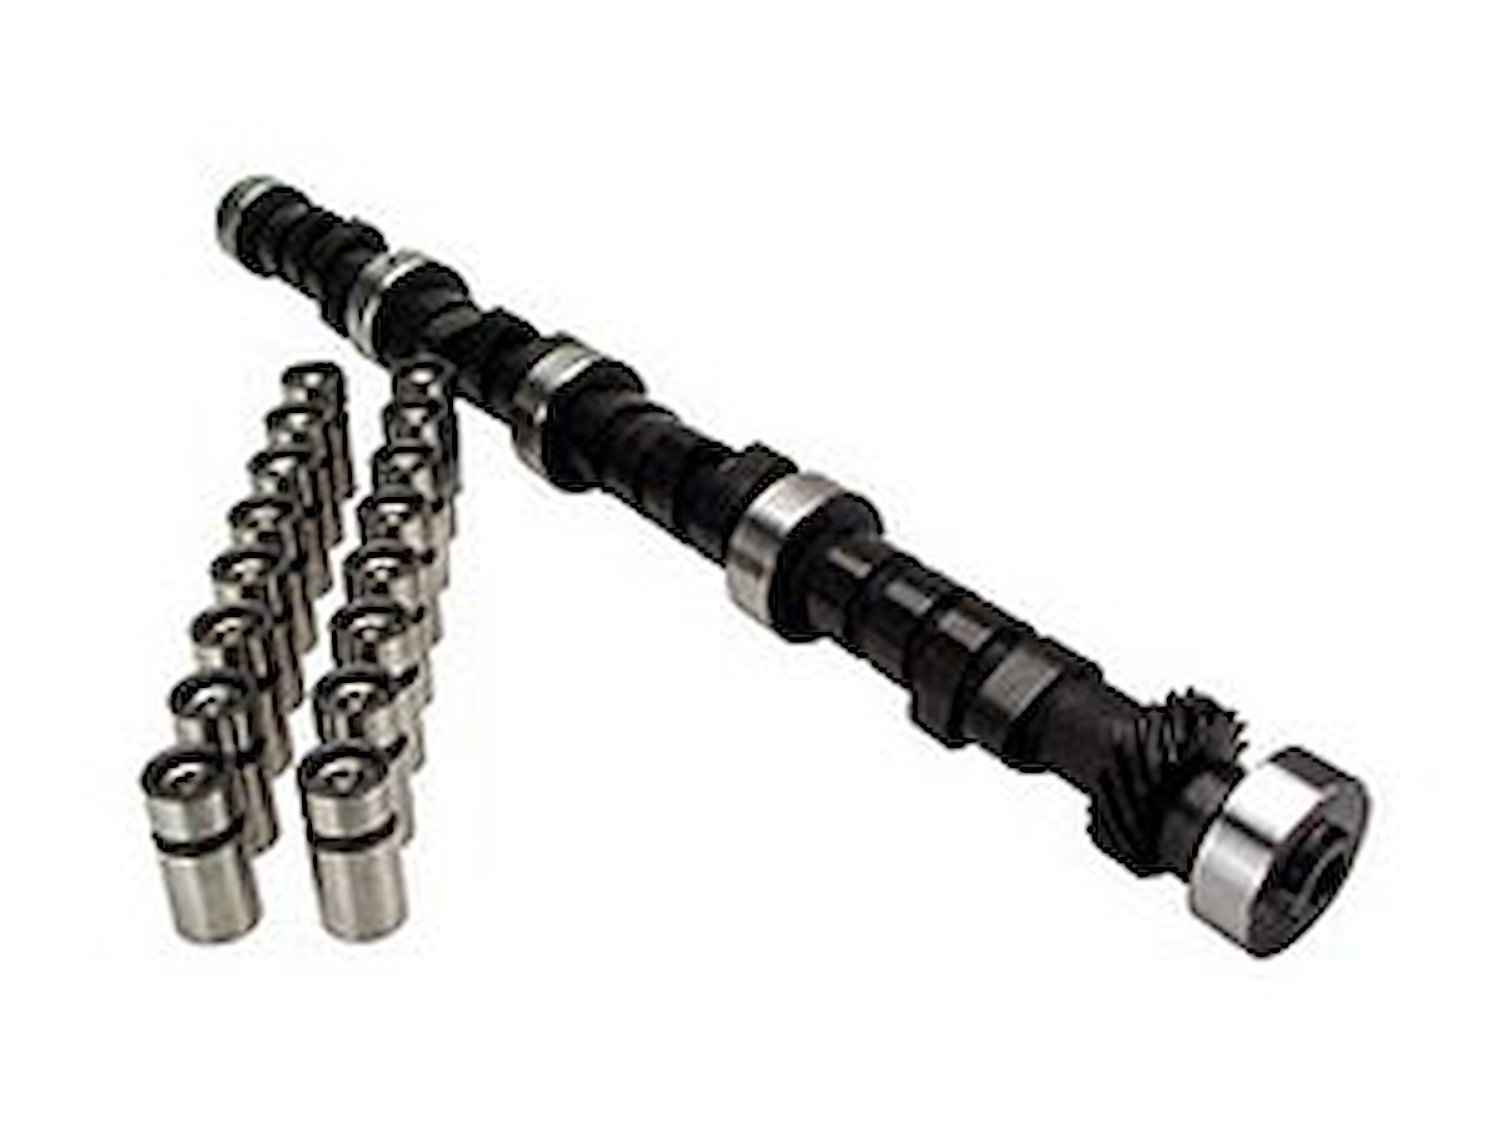 Xtreme Energy 294H Hydraulic Flat Tappet Camshaft &